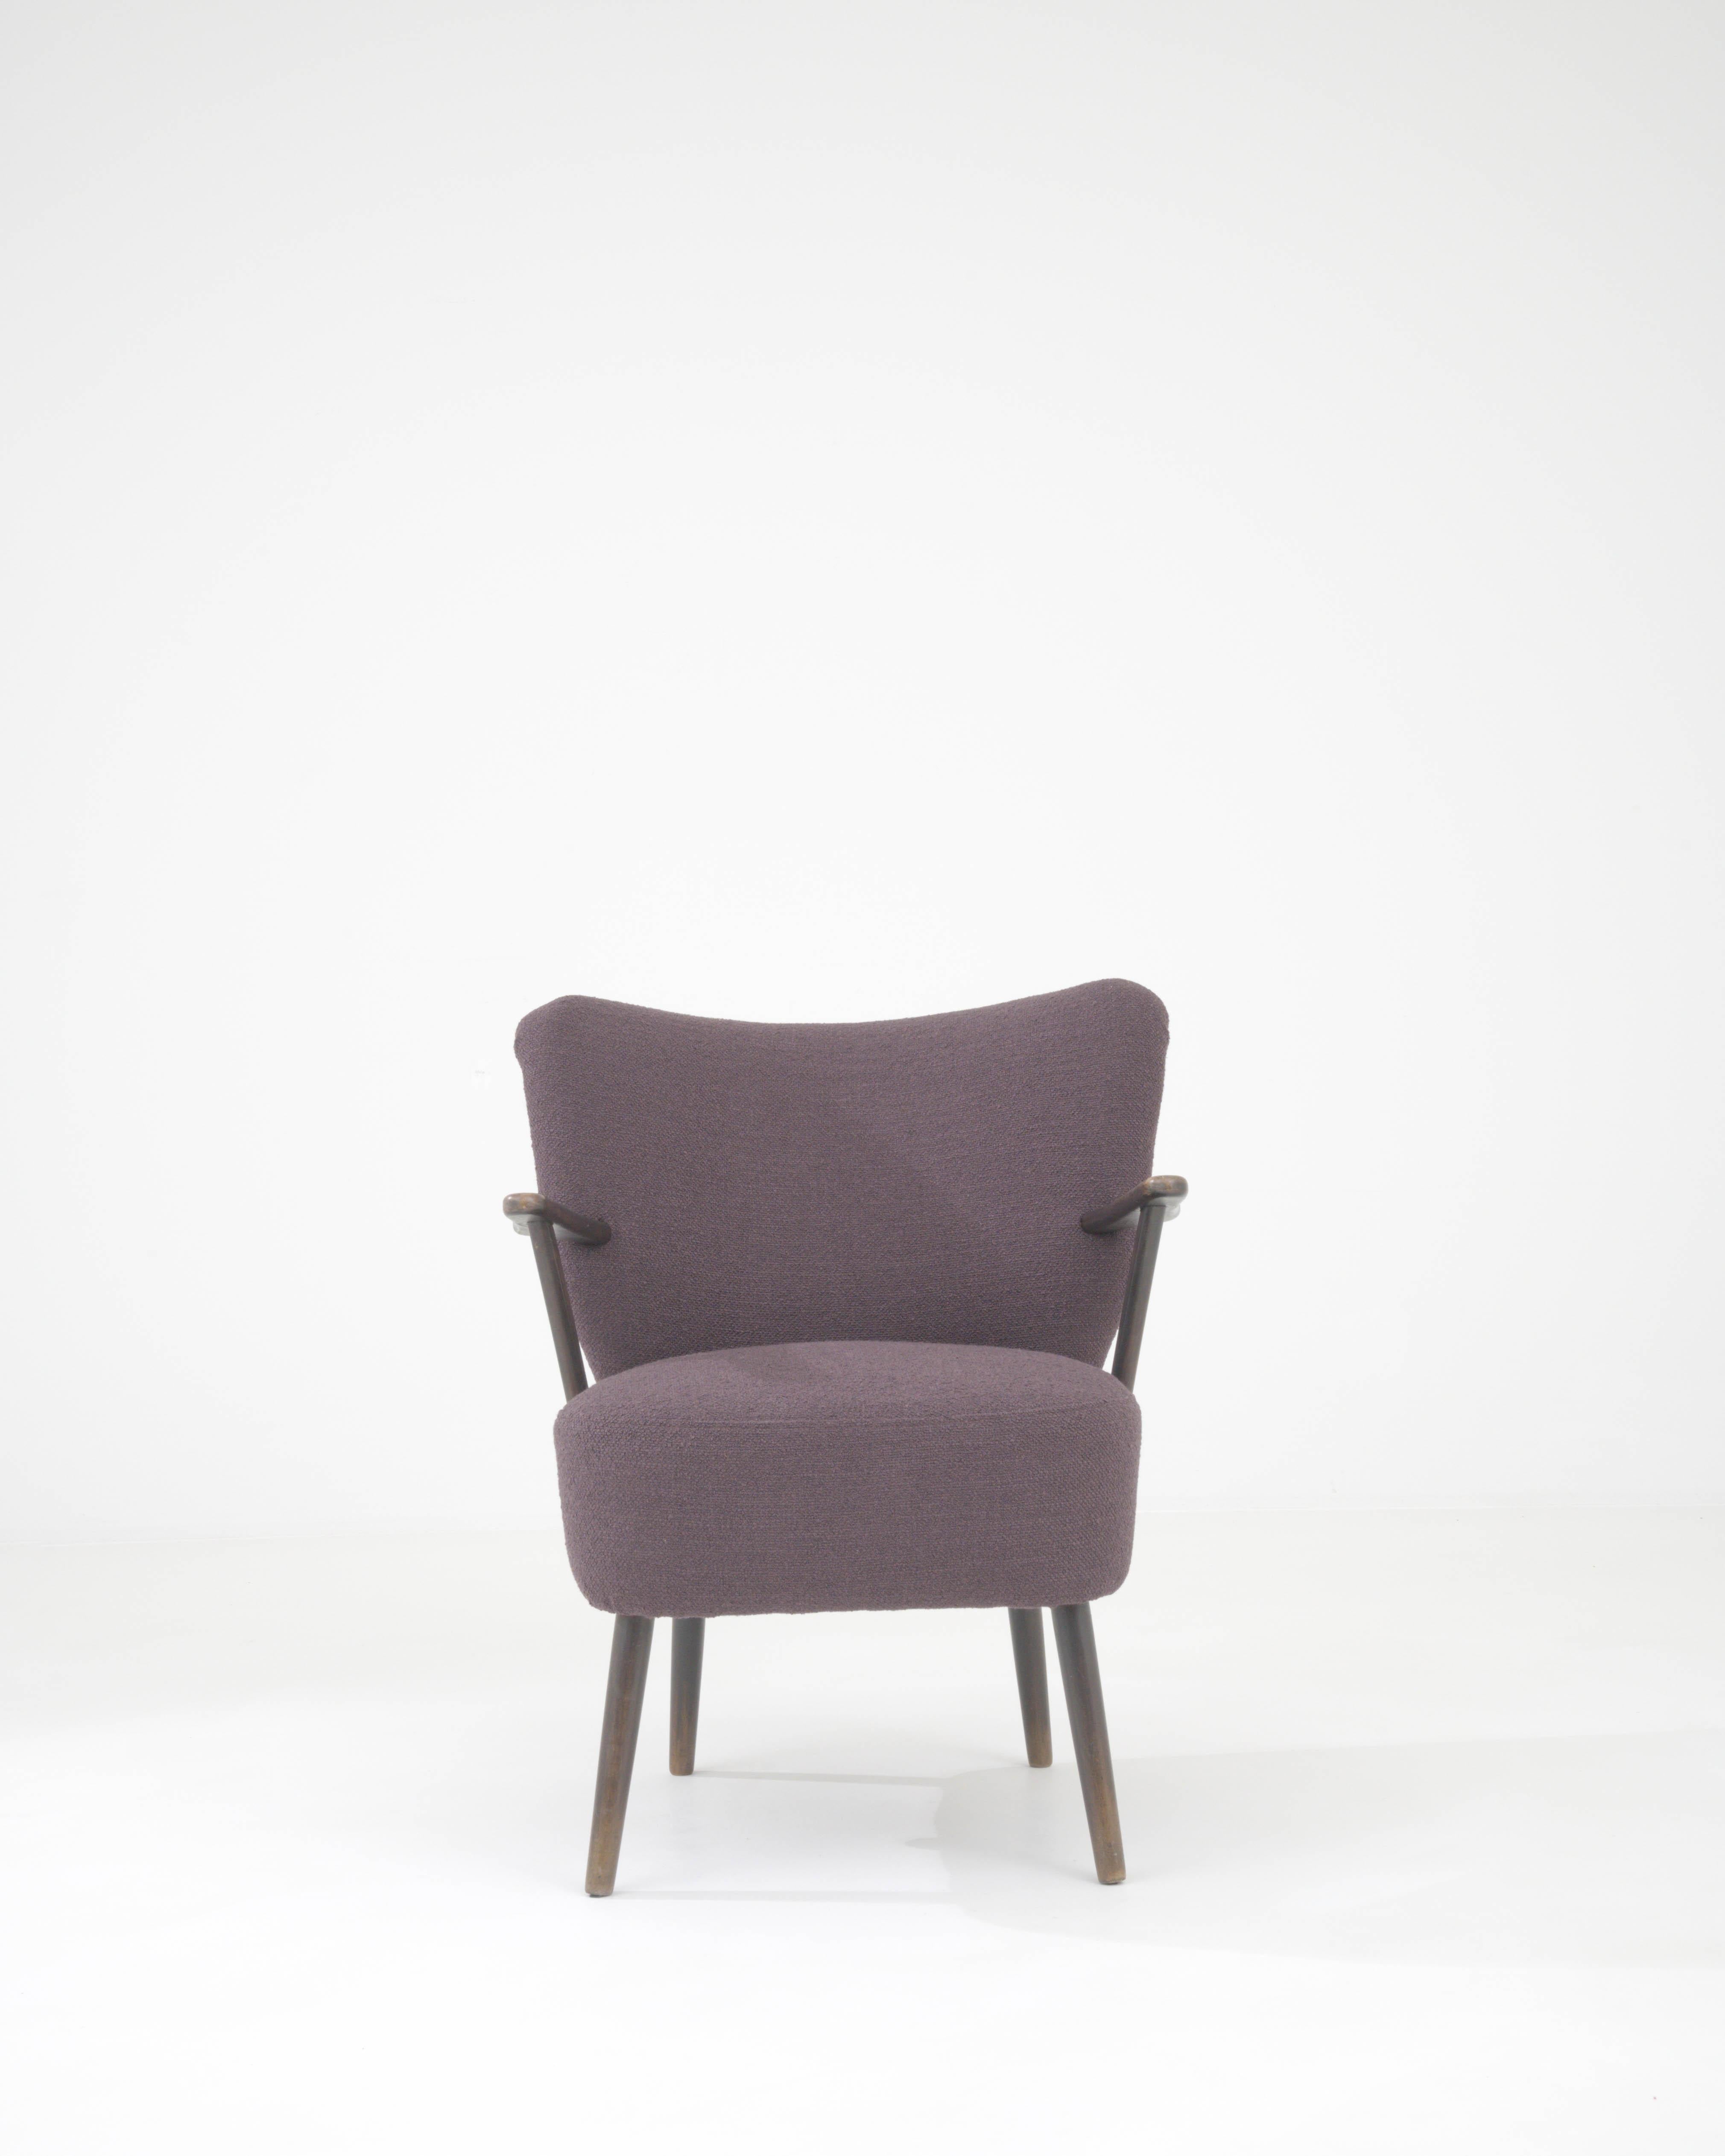 Step into the realm of classic comfort with this 1960s Danish Upholstered Armchair, a timeless piece that exudes both elegance and coziness. The chair's rich plum upholstery invites you to sink into its soft embrace, perfect for unwinding after a